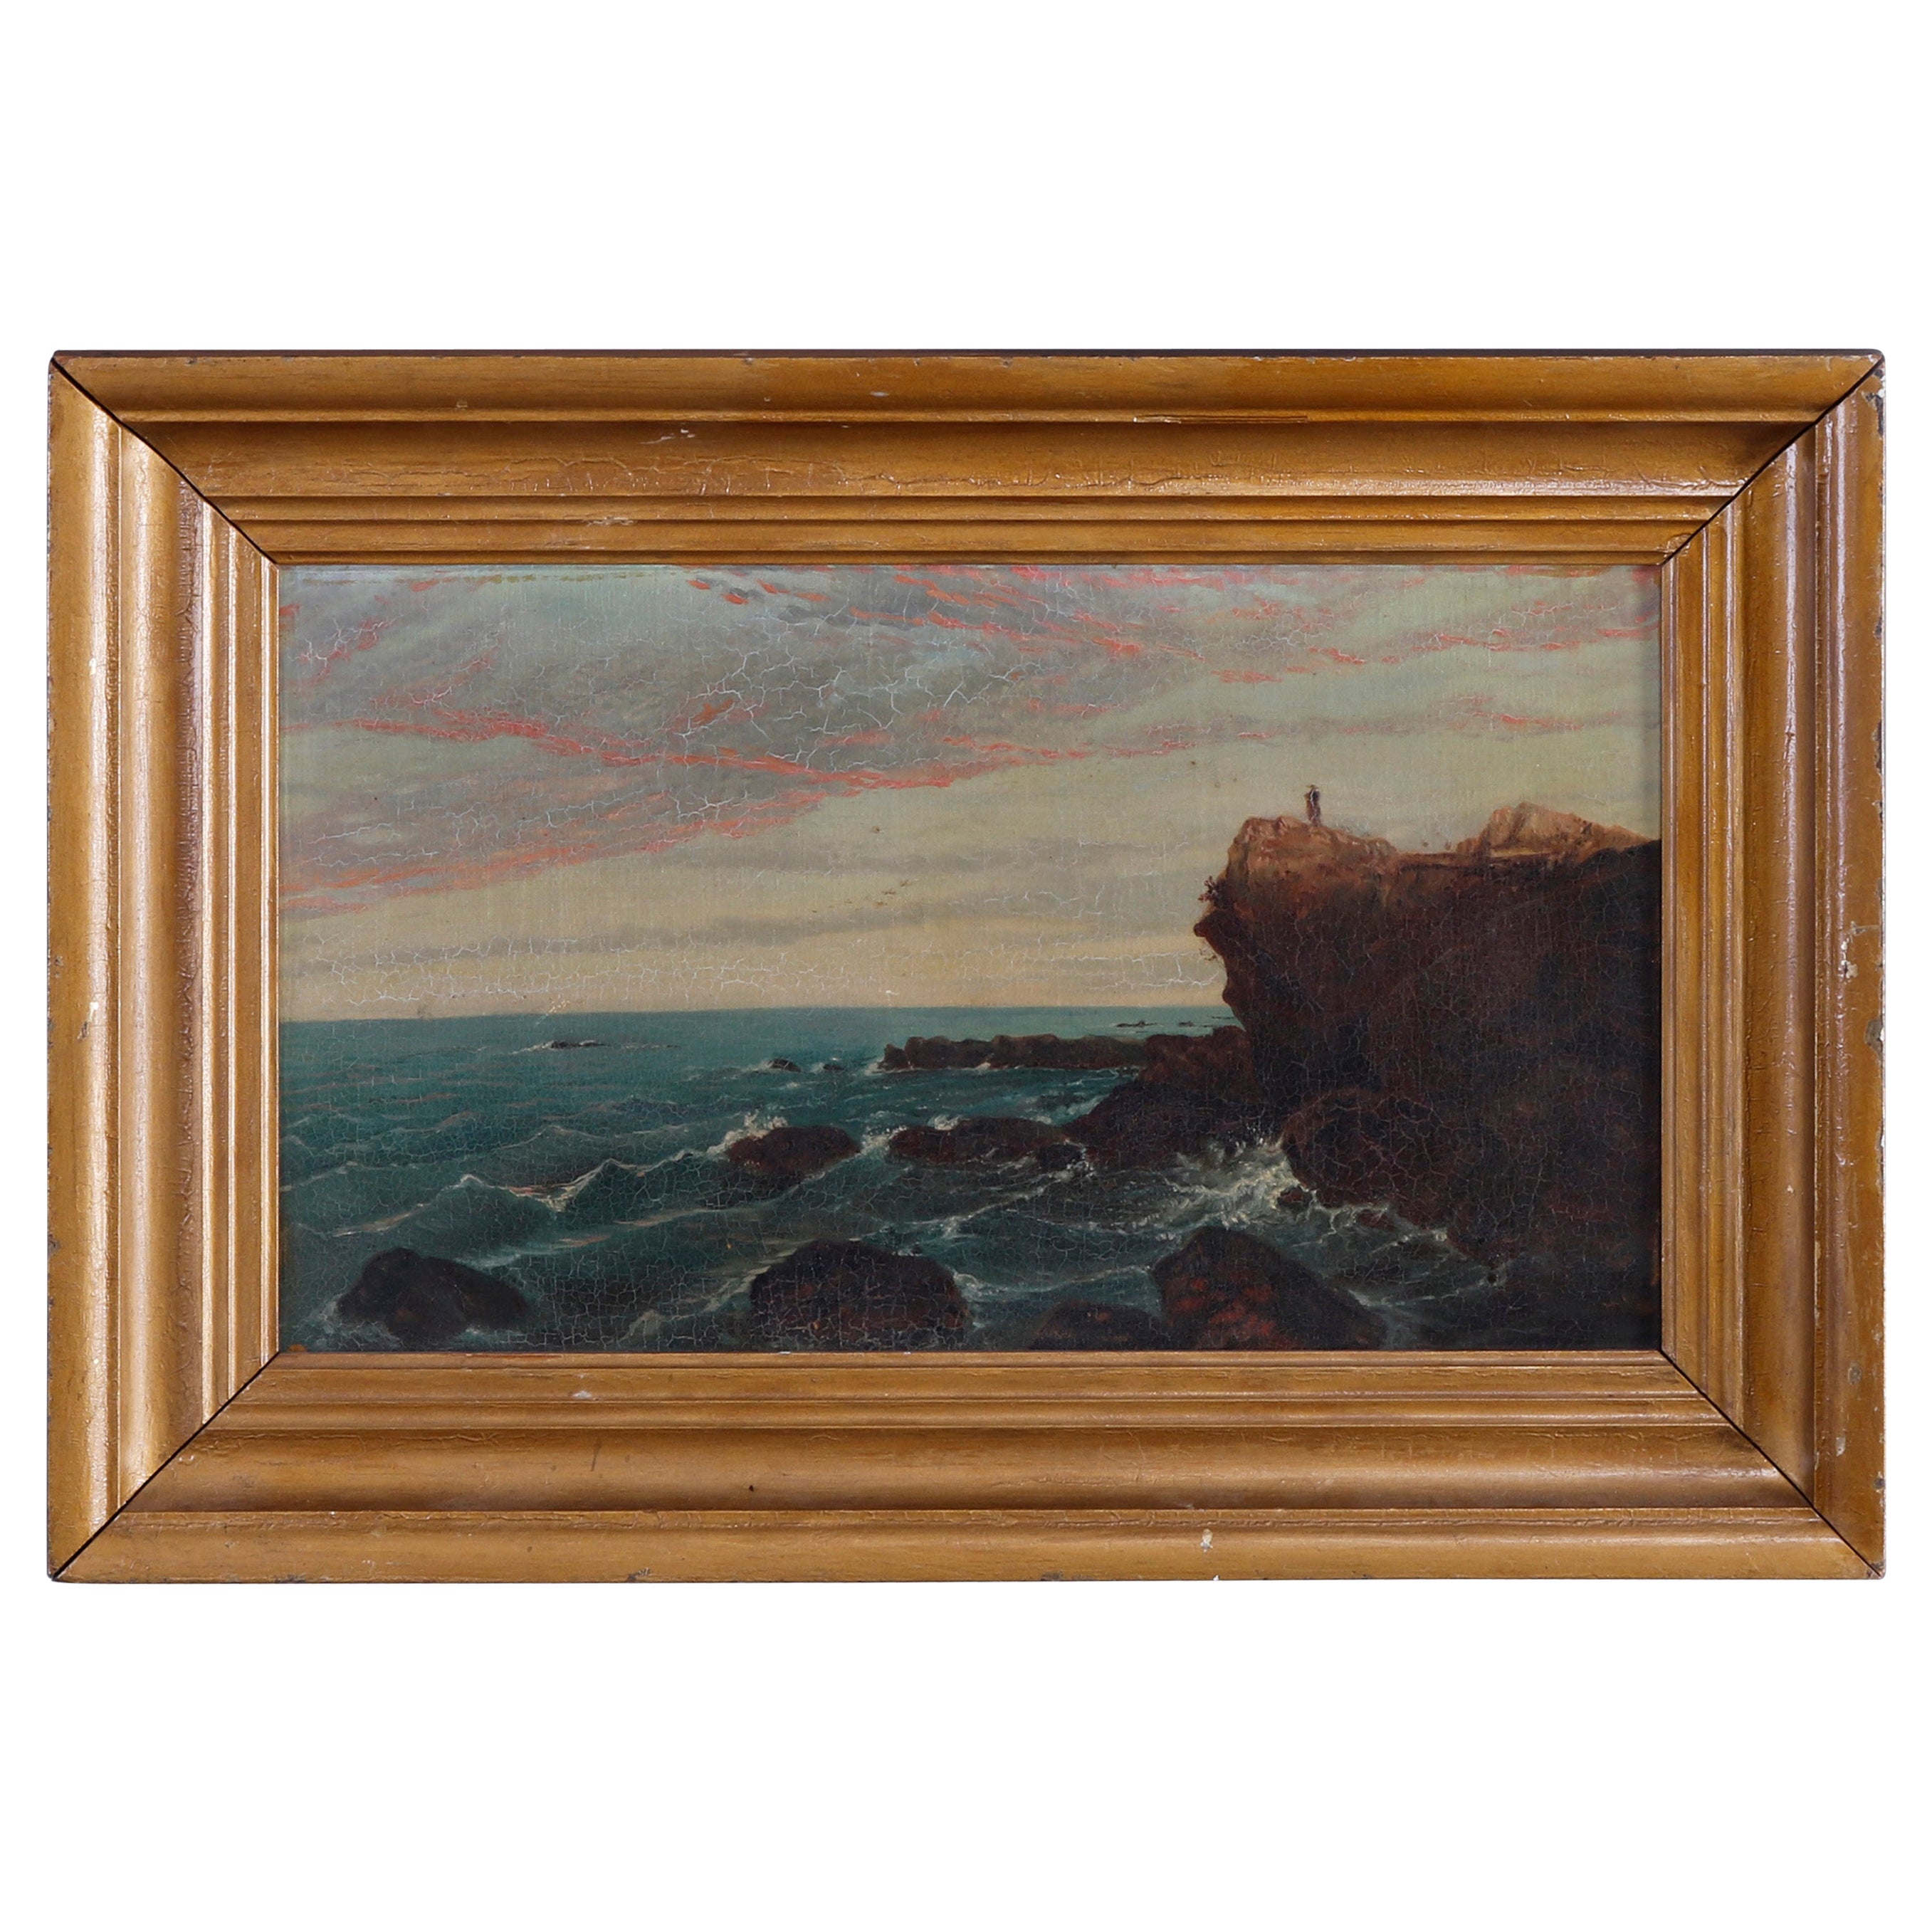 Antique Oil on Canvas Painting of Coastal Cliffside Seascape with Figure, c1840